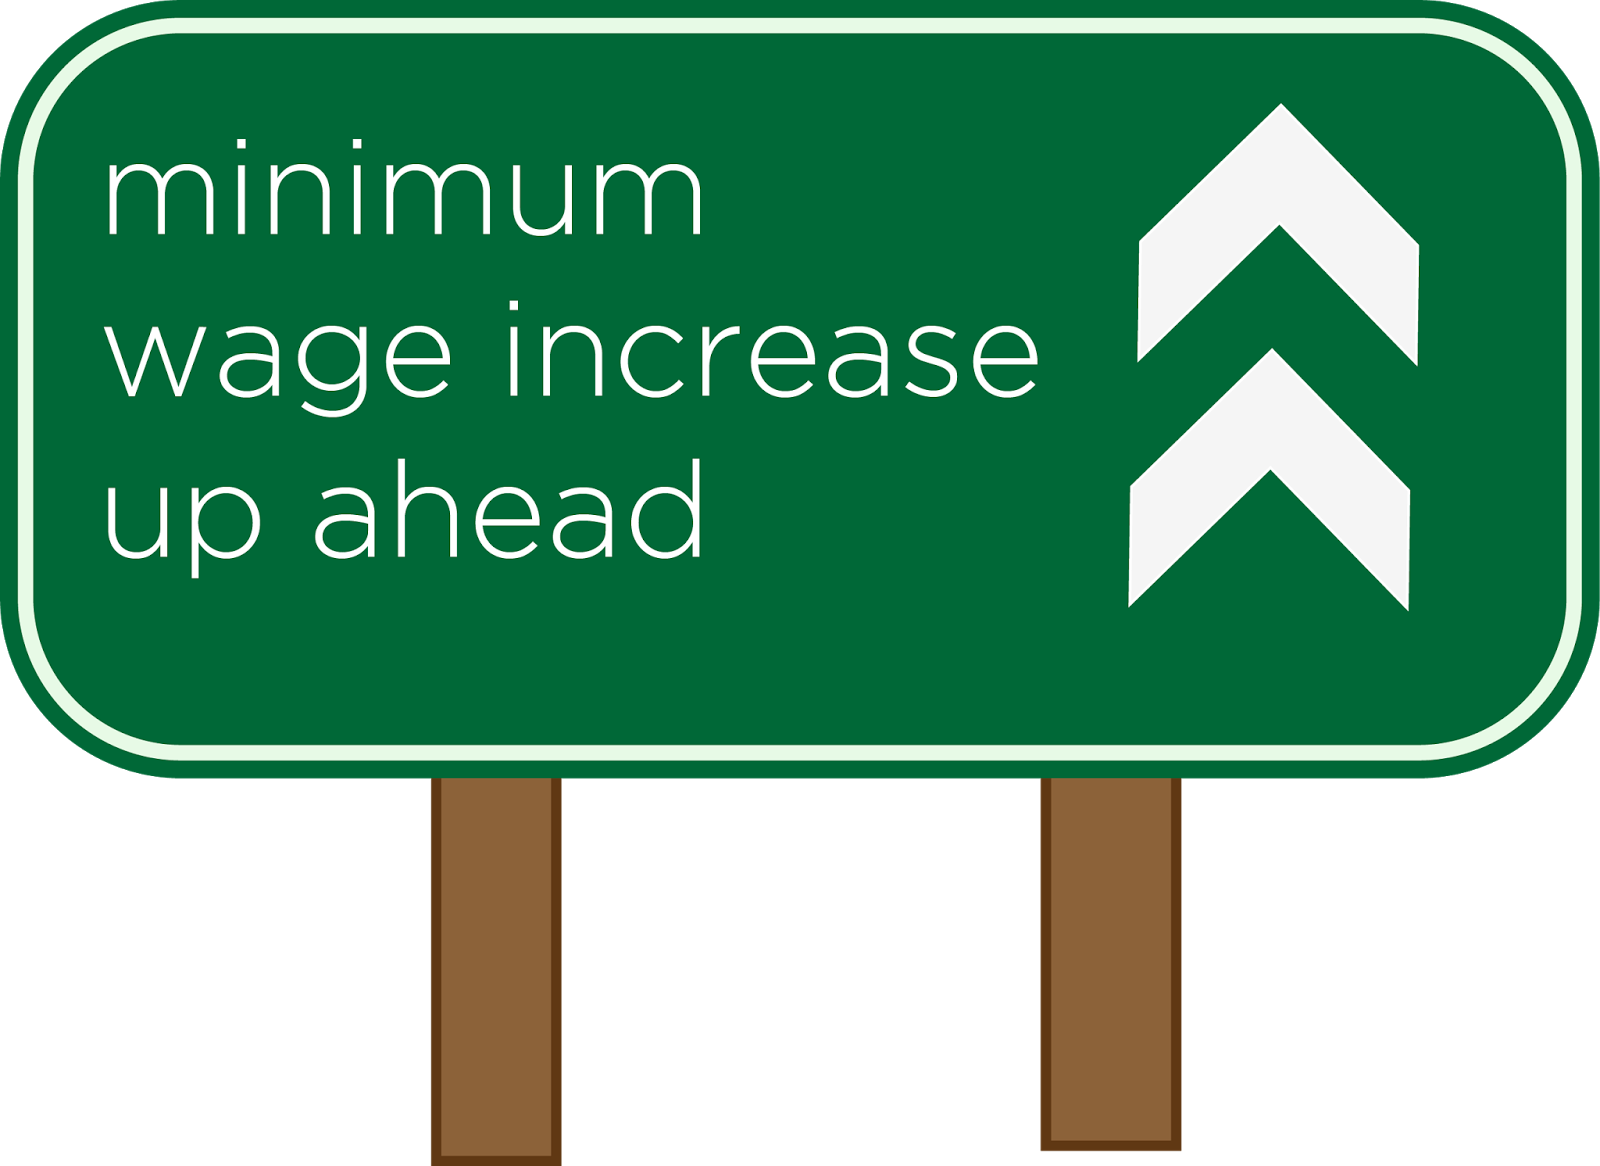 Minimum wage is due to rise